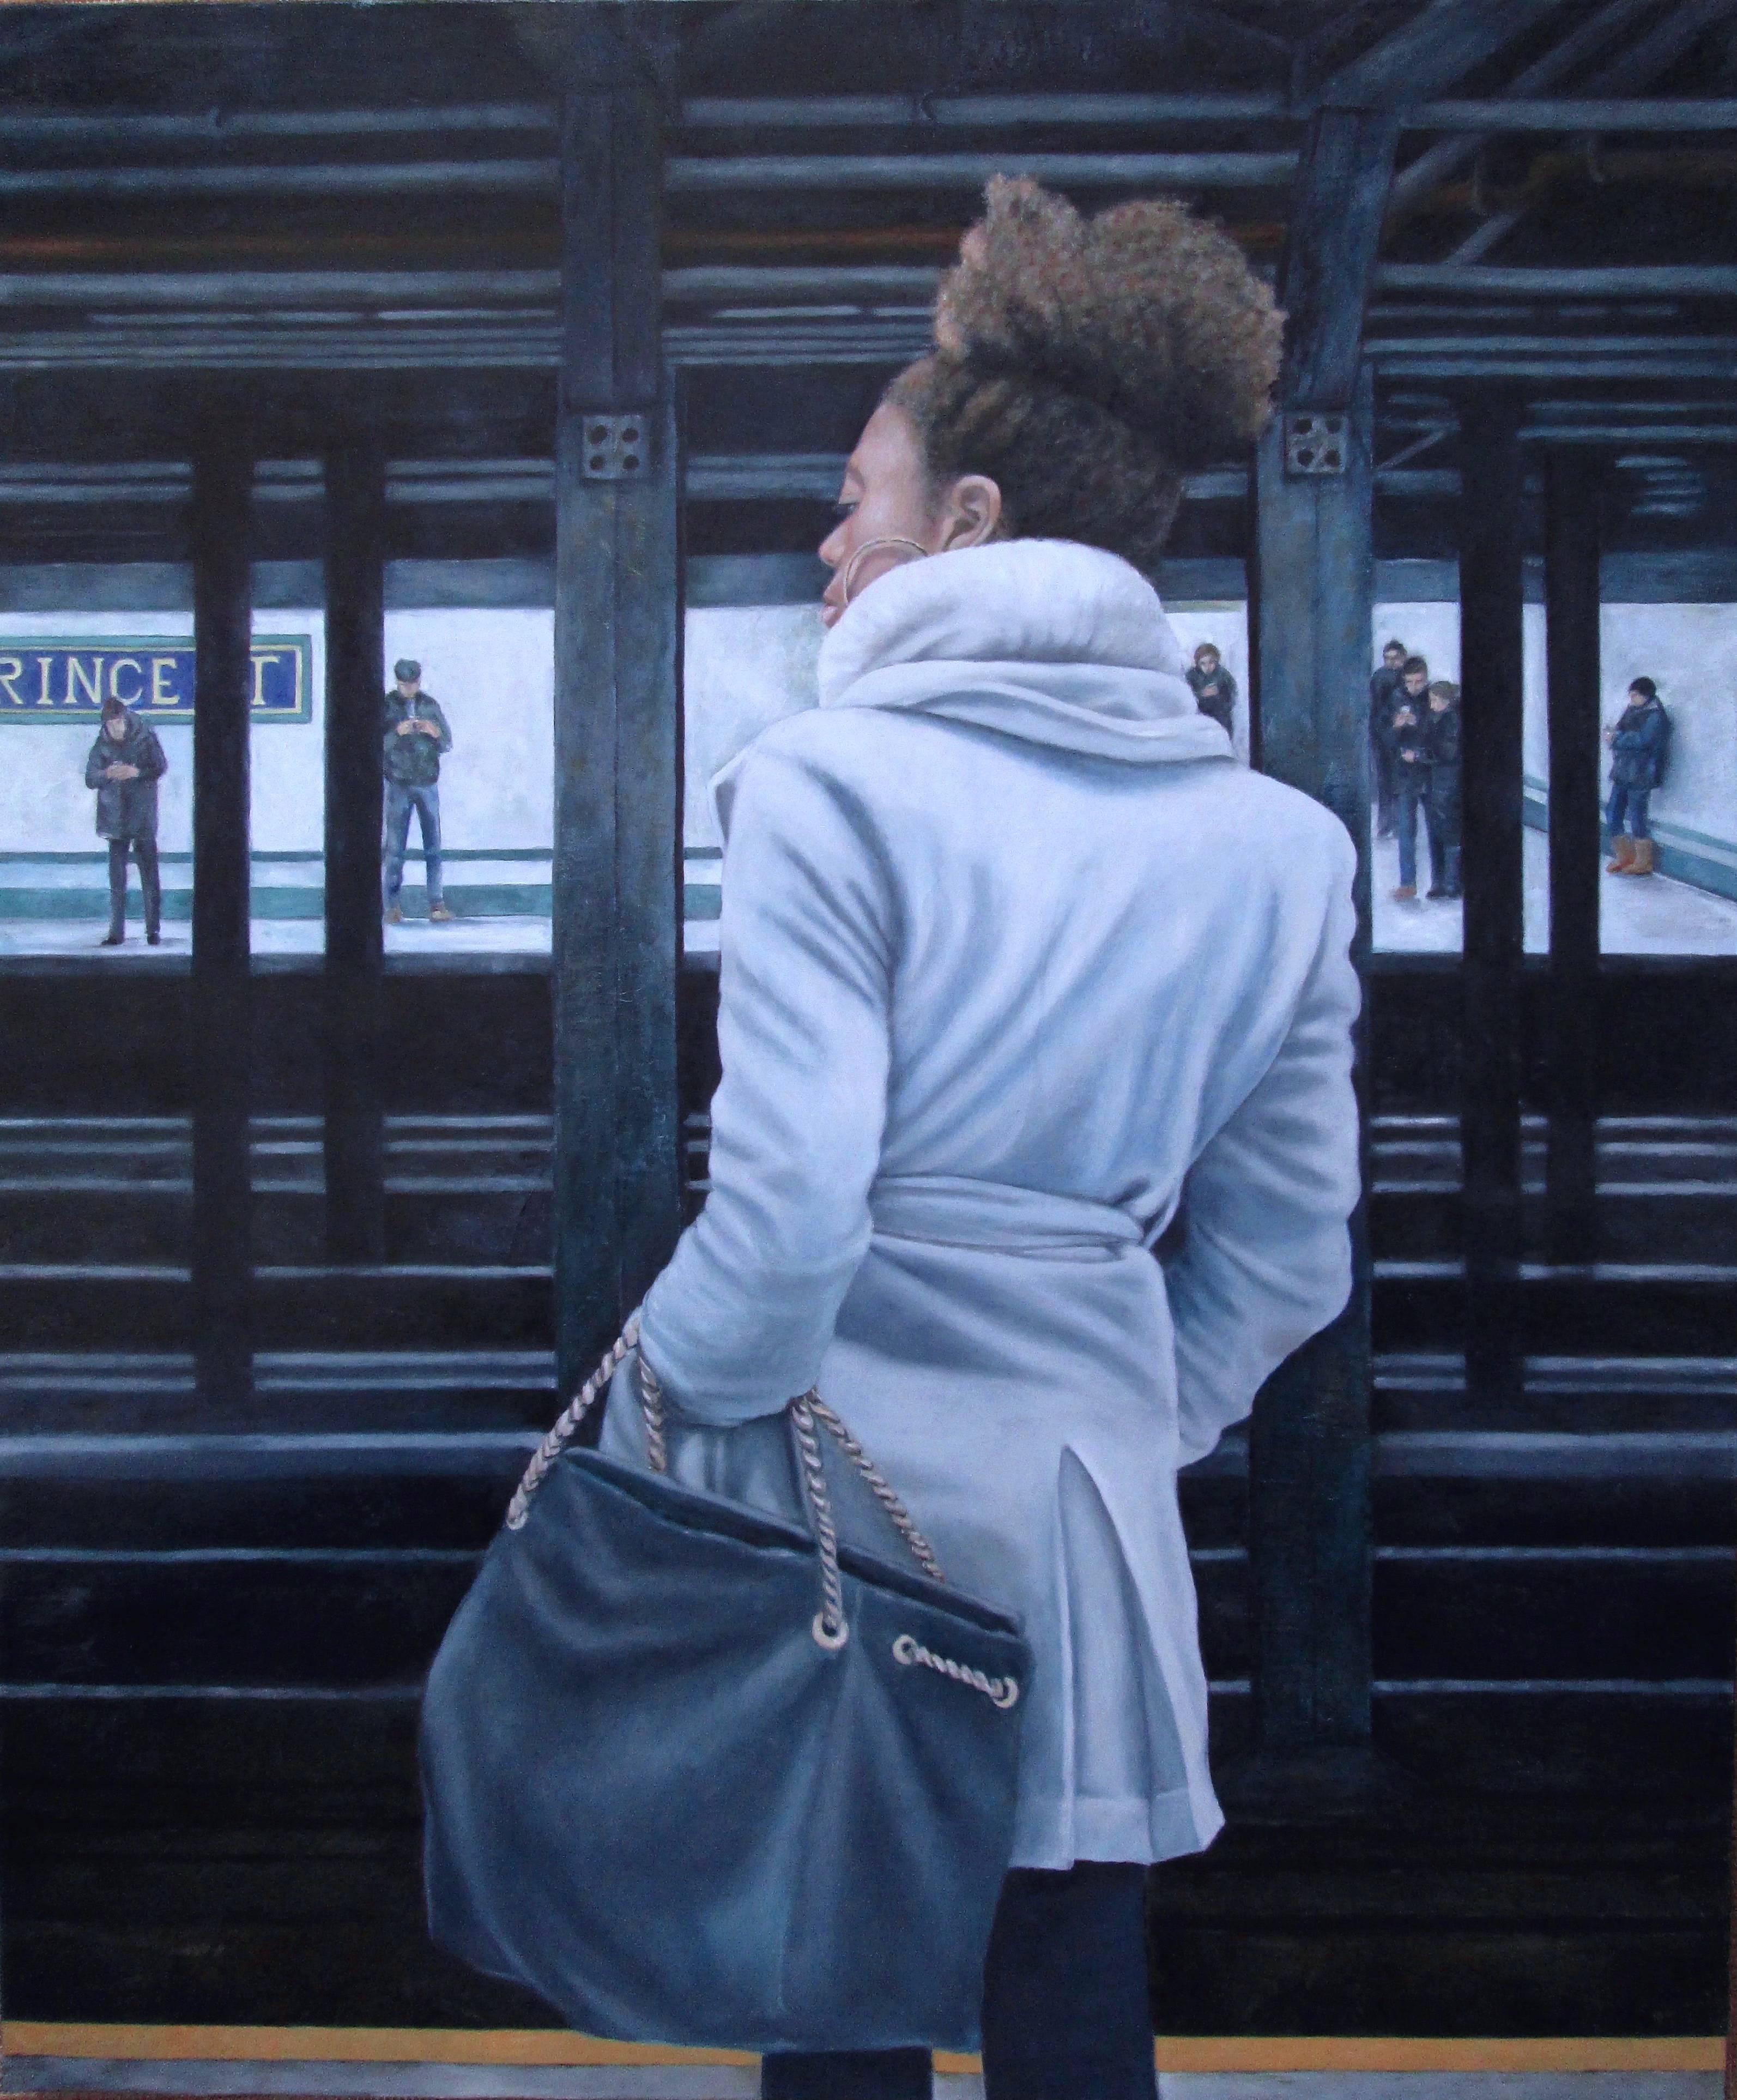 Kris Galli Figurative Painting - The Angel of Prince Street Station